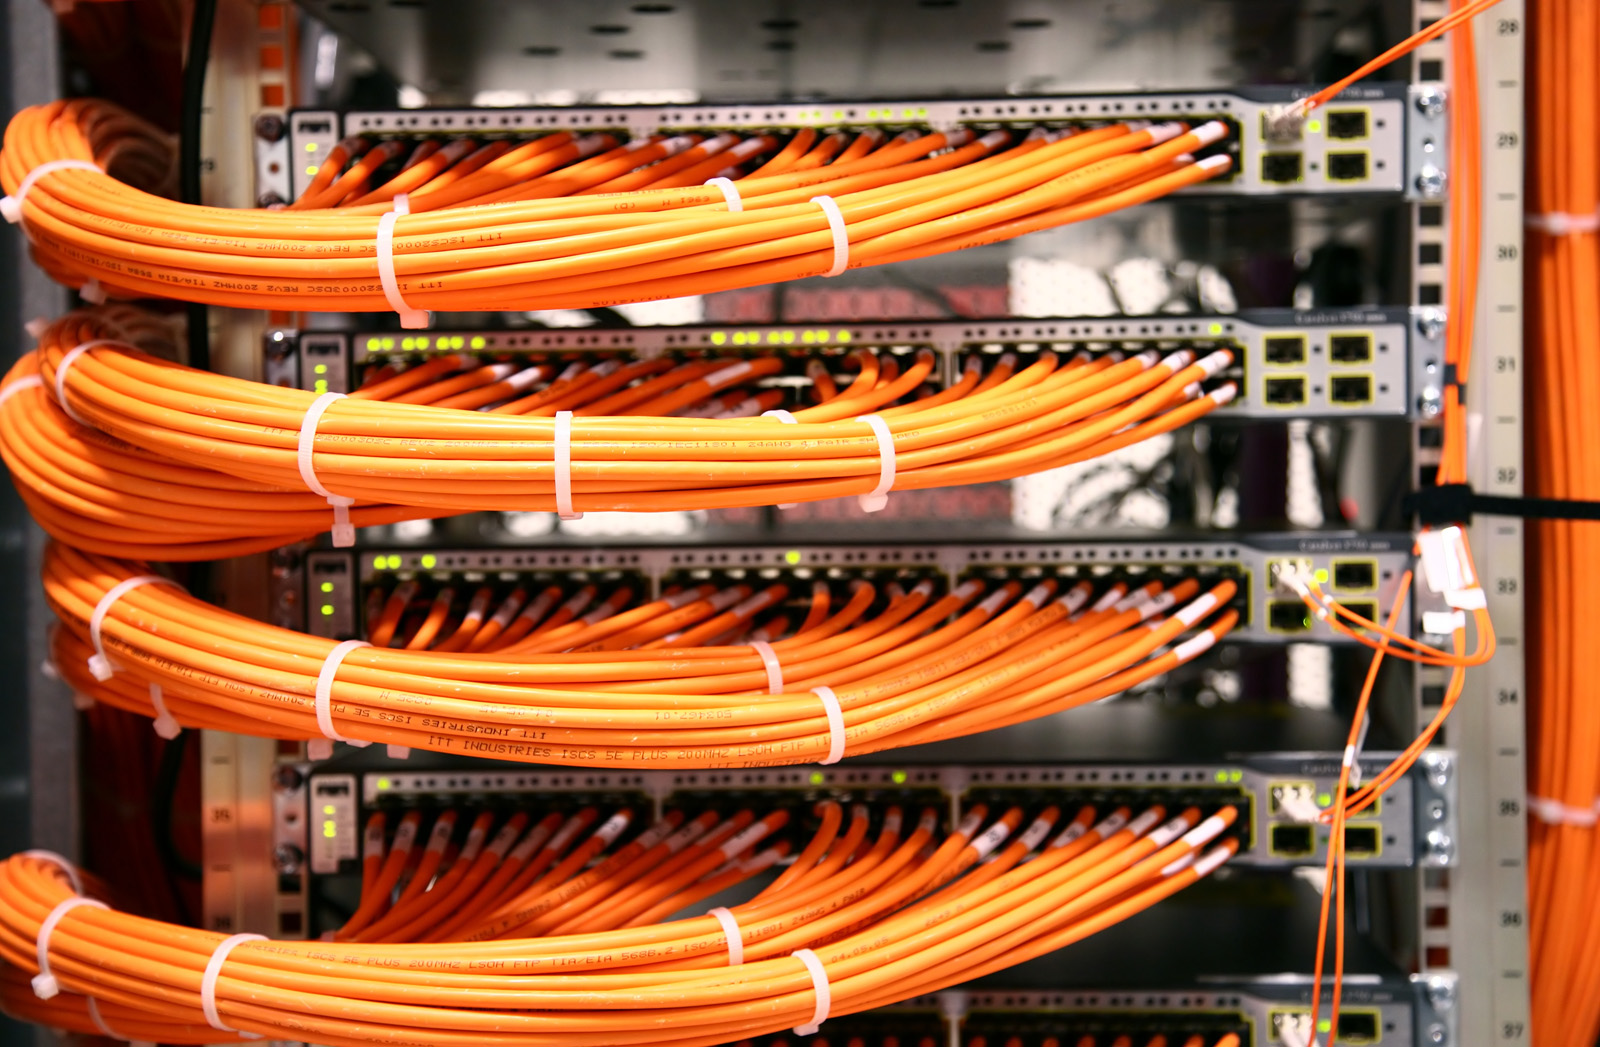 Walton Kentucky High Quality Voice & Data Network Cabling Provider